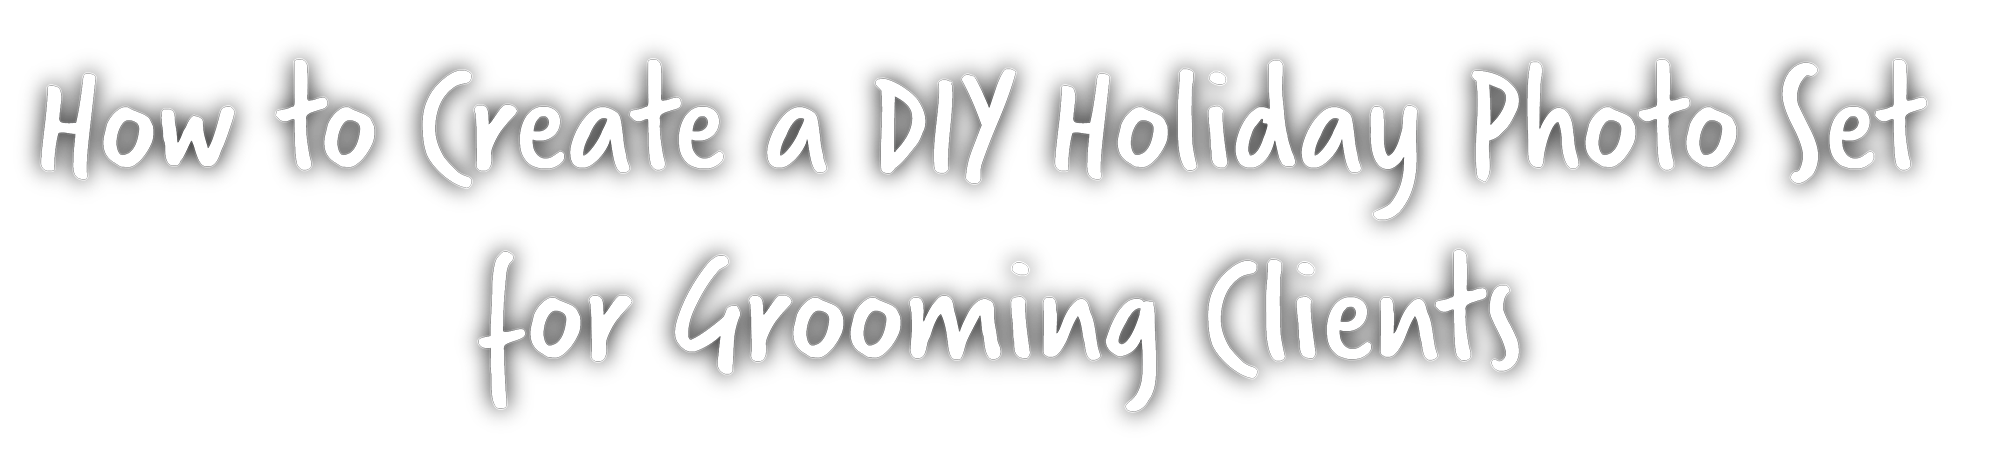 How to create a DIY holiday photo set for Grooming Clients